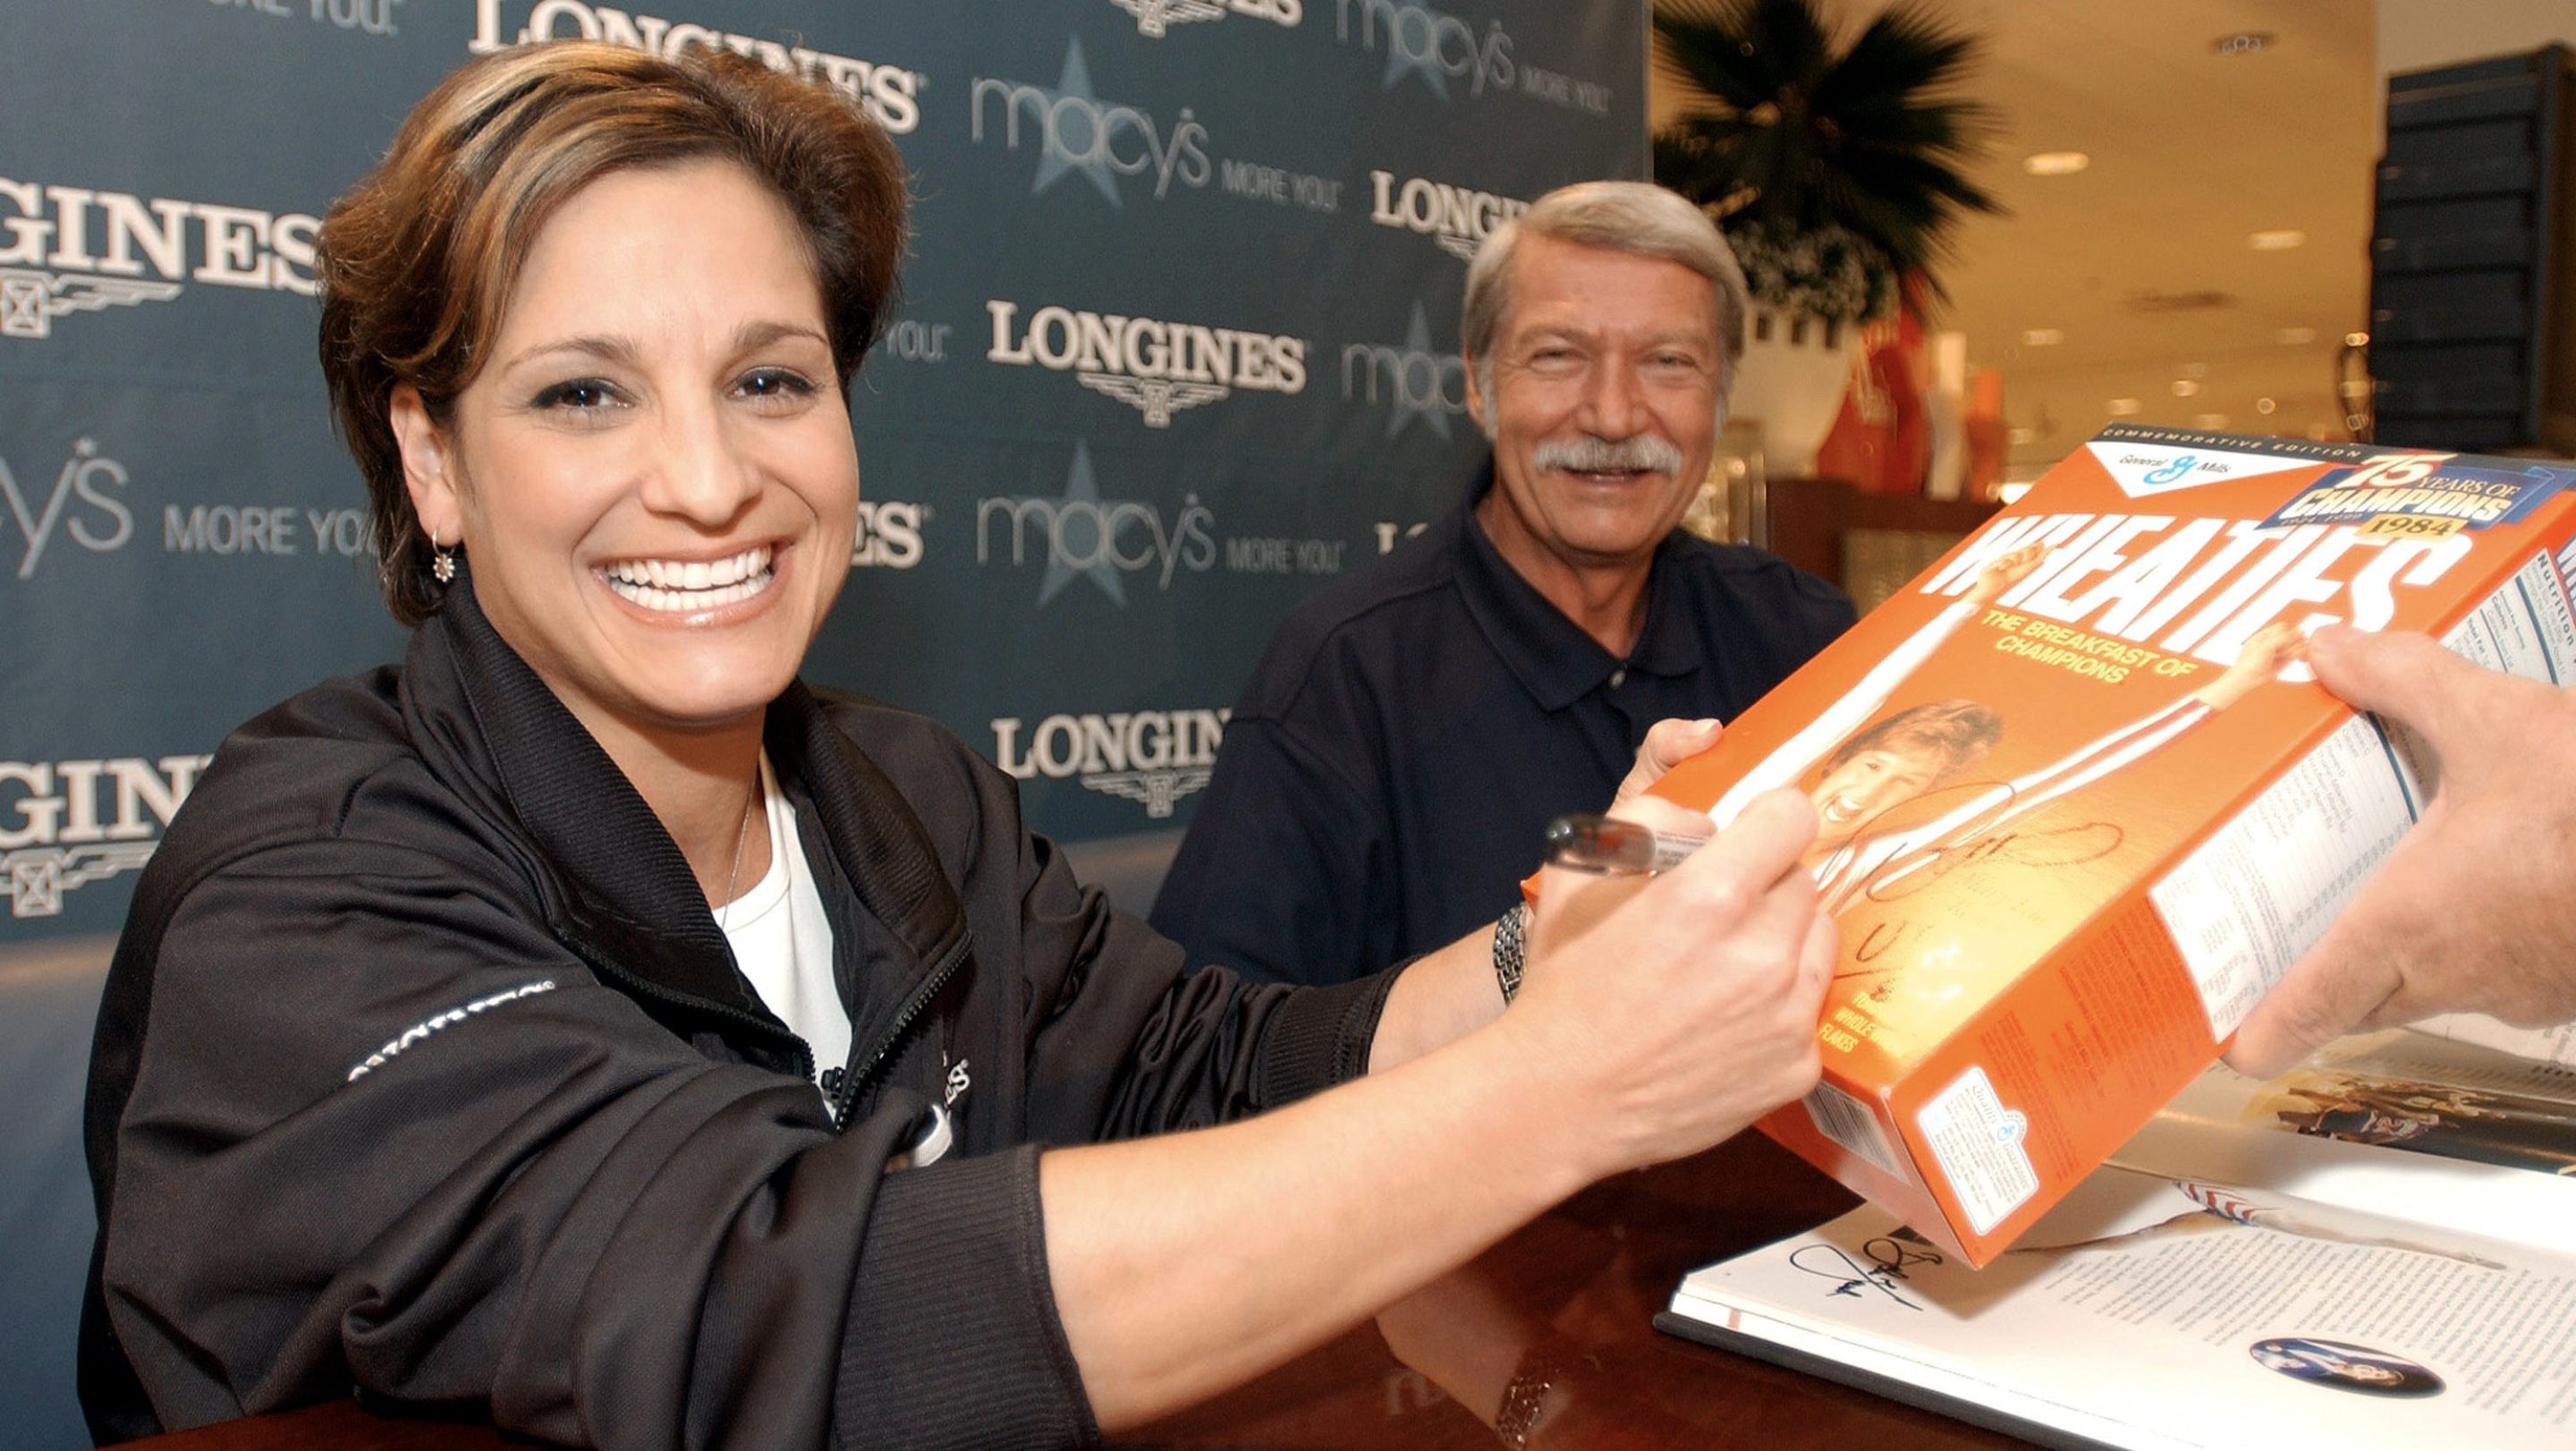 Mary Lou Retton signs a Wheaties box in 2003. By her side is her longtime coach, Bela Karolyi